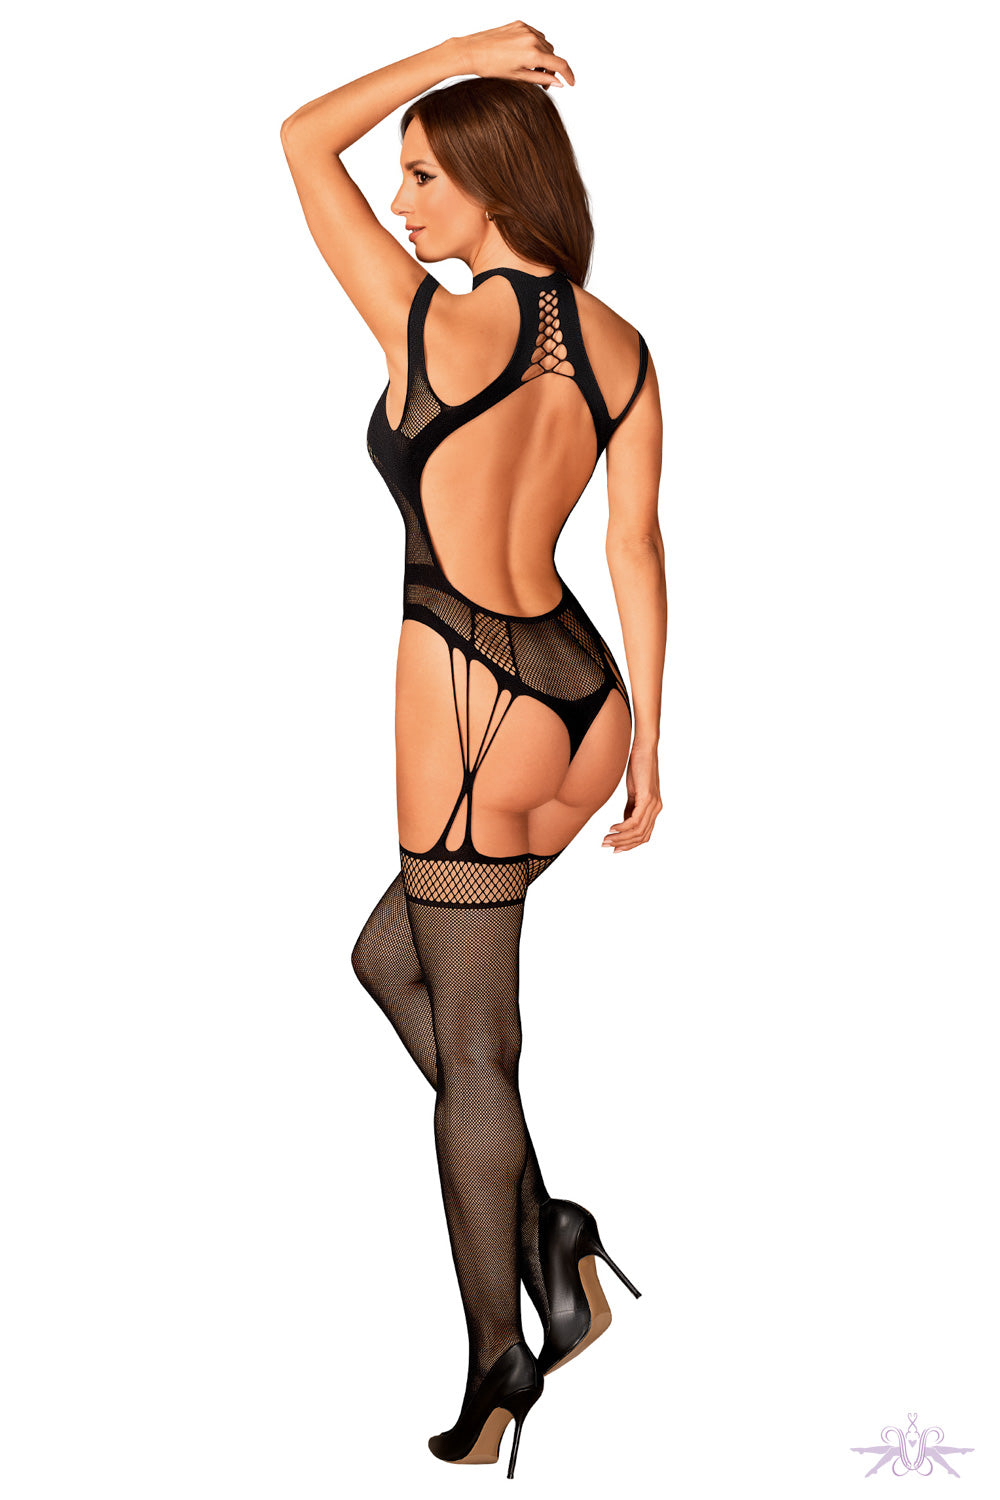 Obsessive Cut-Out Design Fishnet Bodystocking